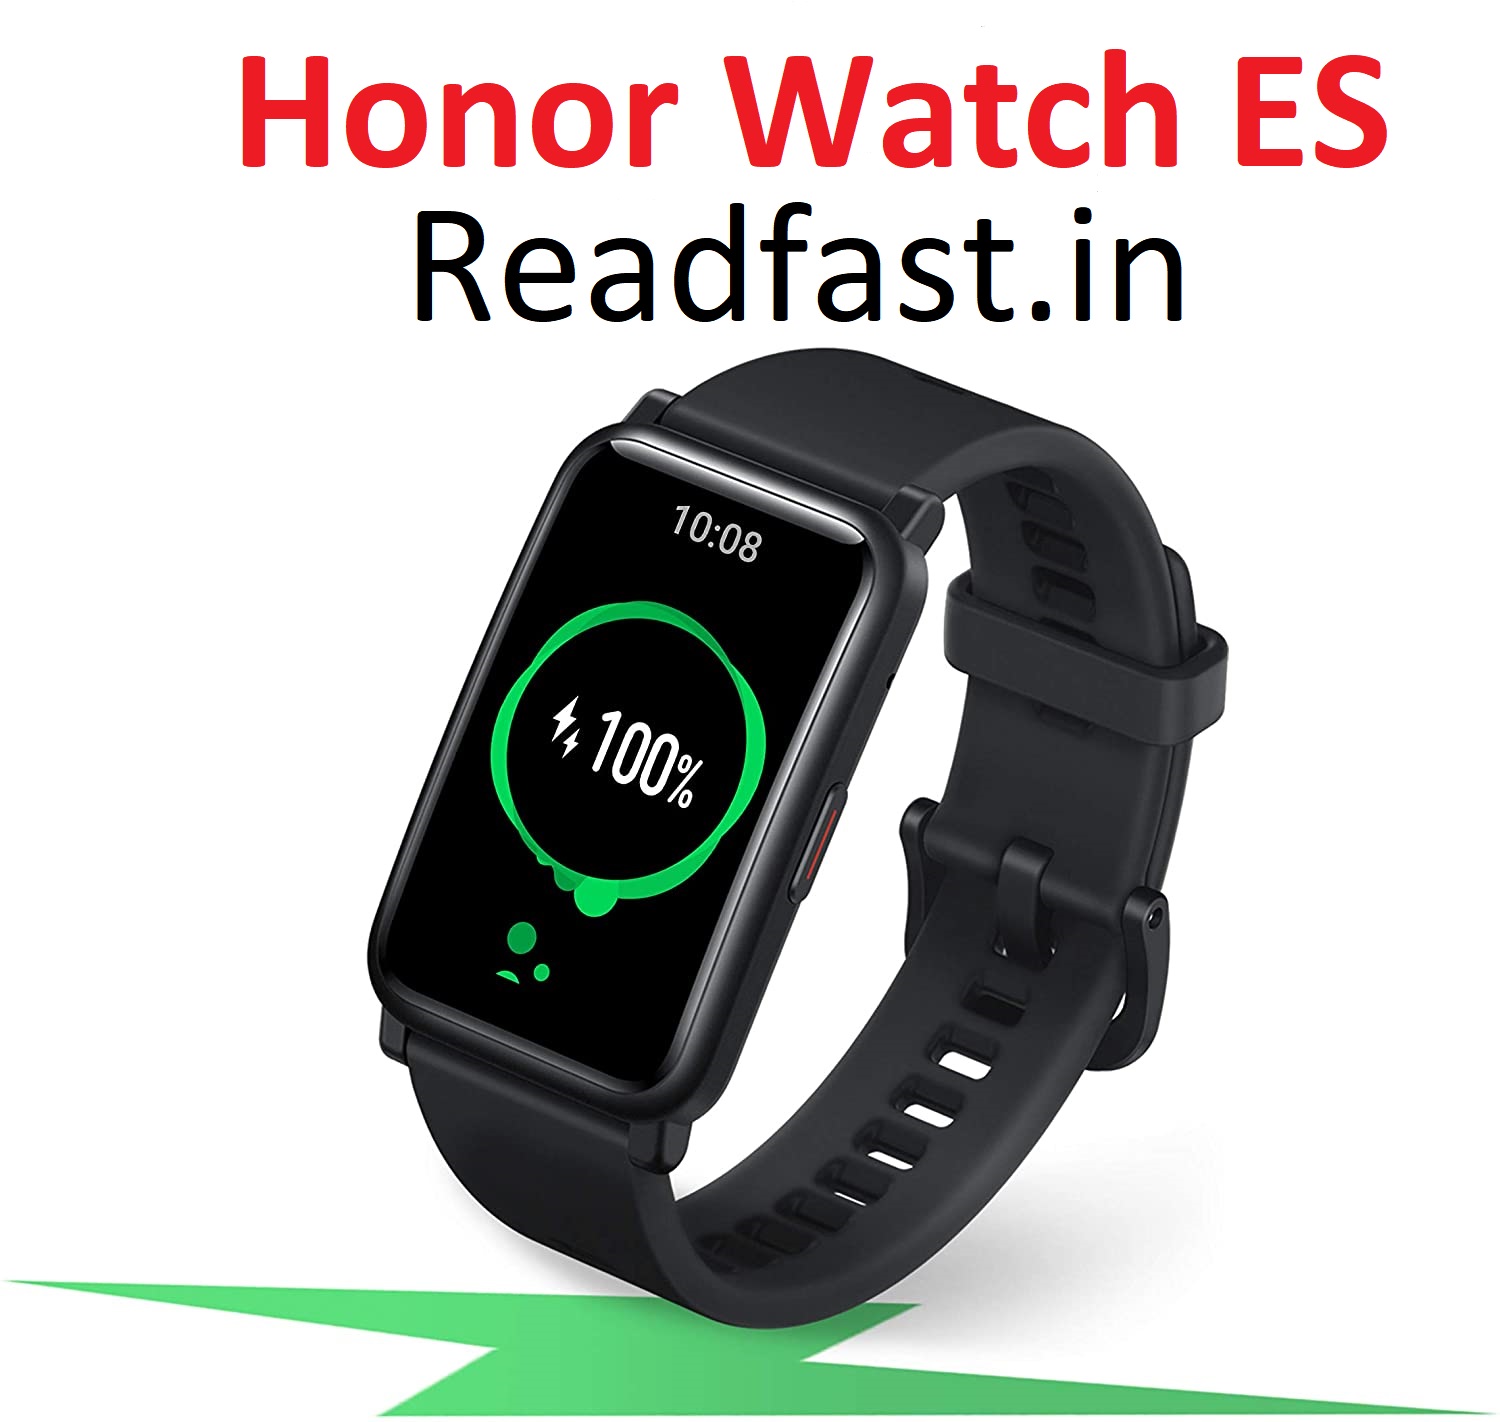 Honor watch ES smartwatch full review